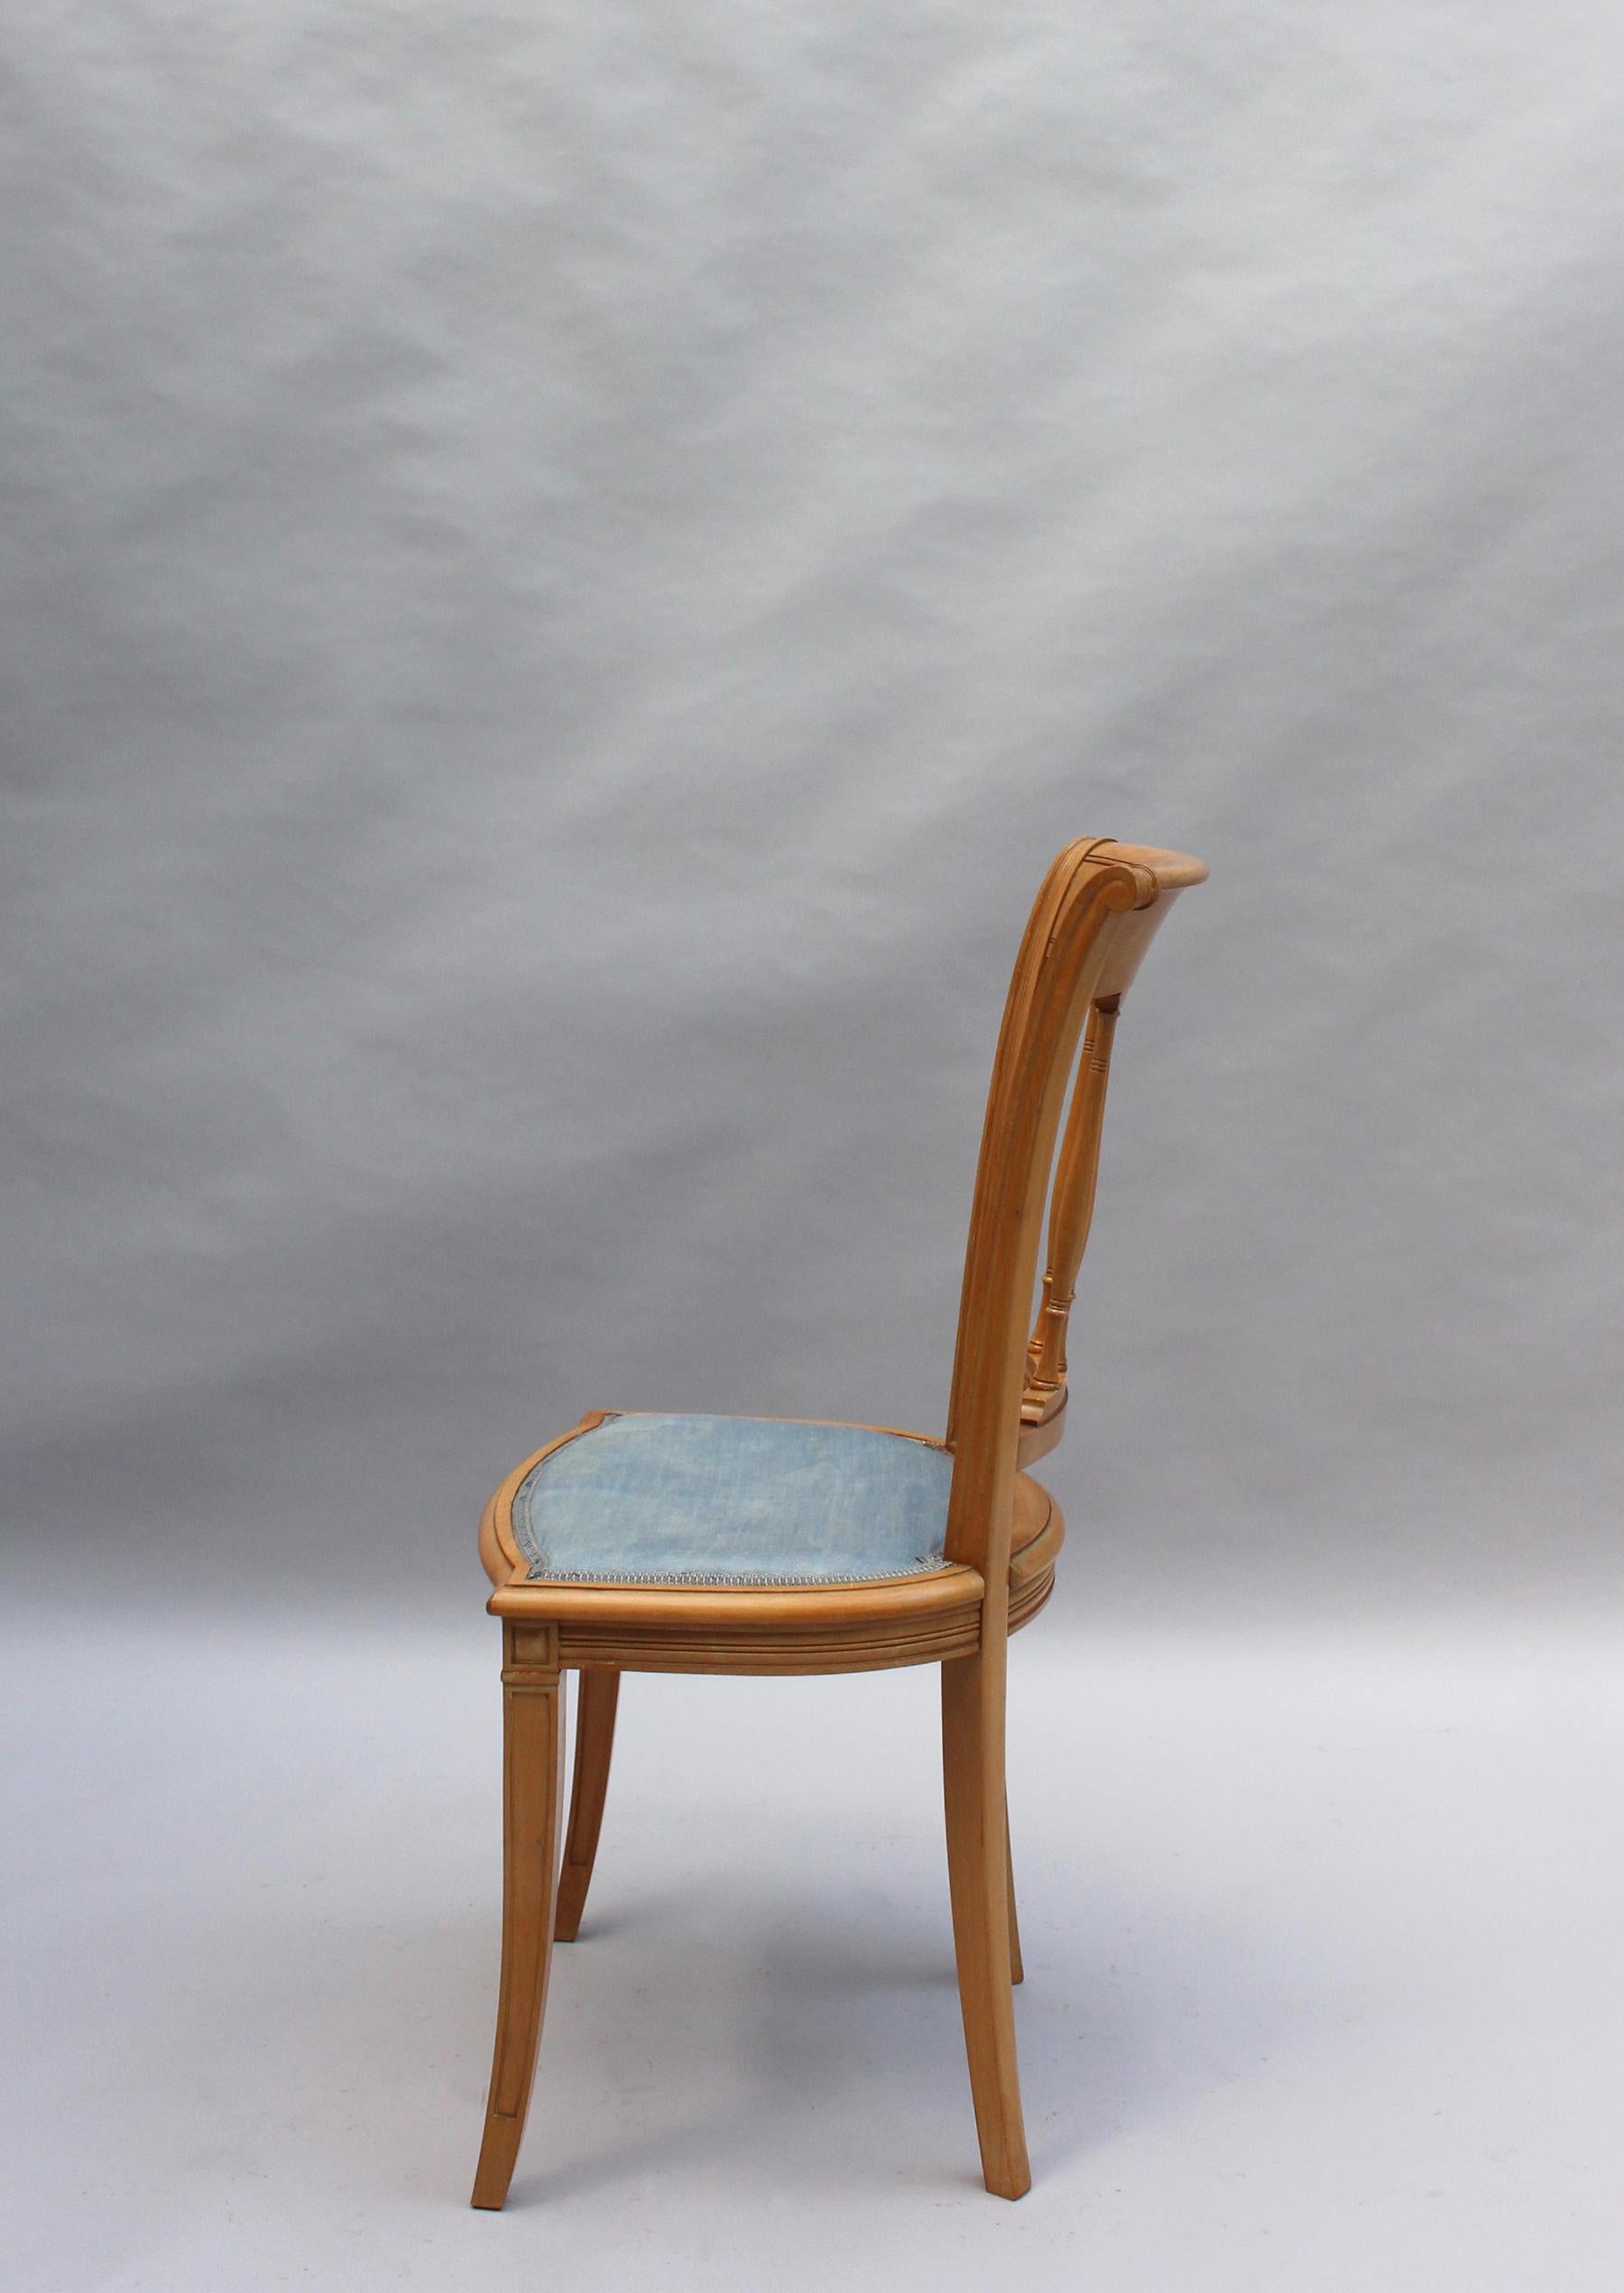 Sycamore 2 Fine French Art Deco Chairs by R. Damon & Bertaux For Sale